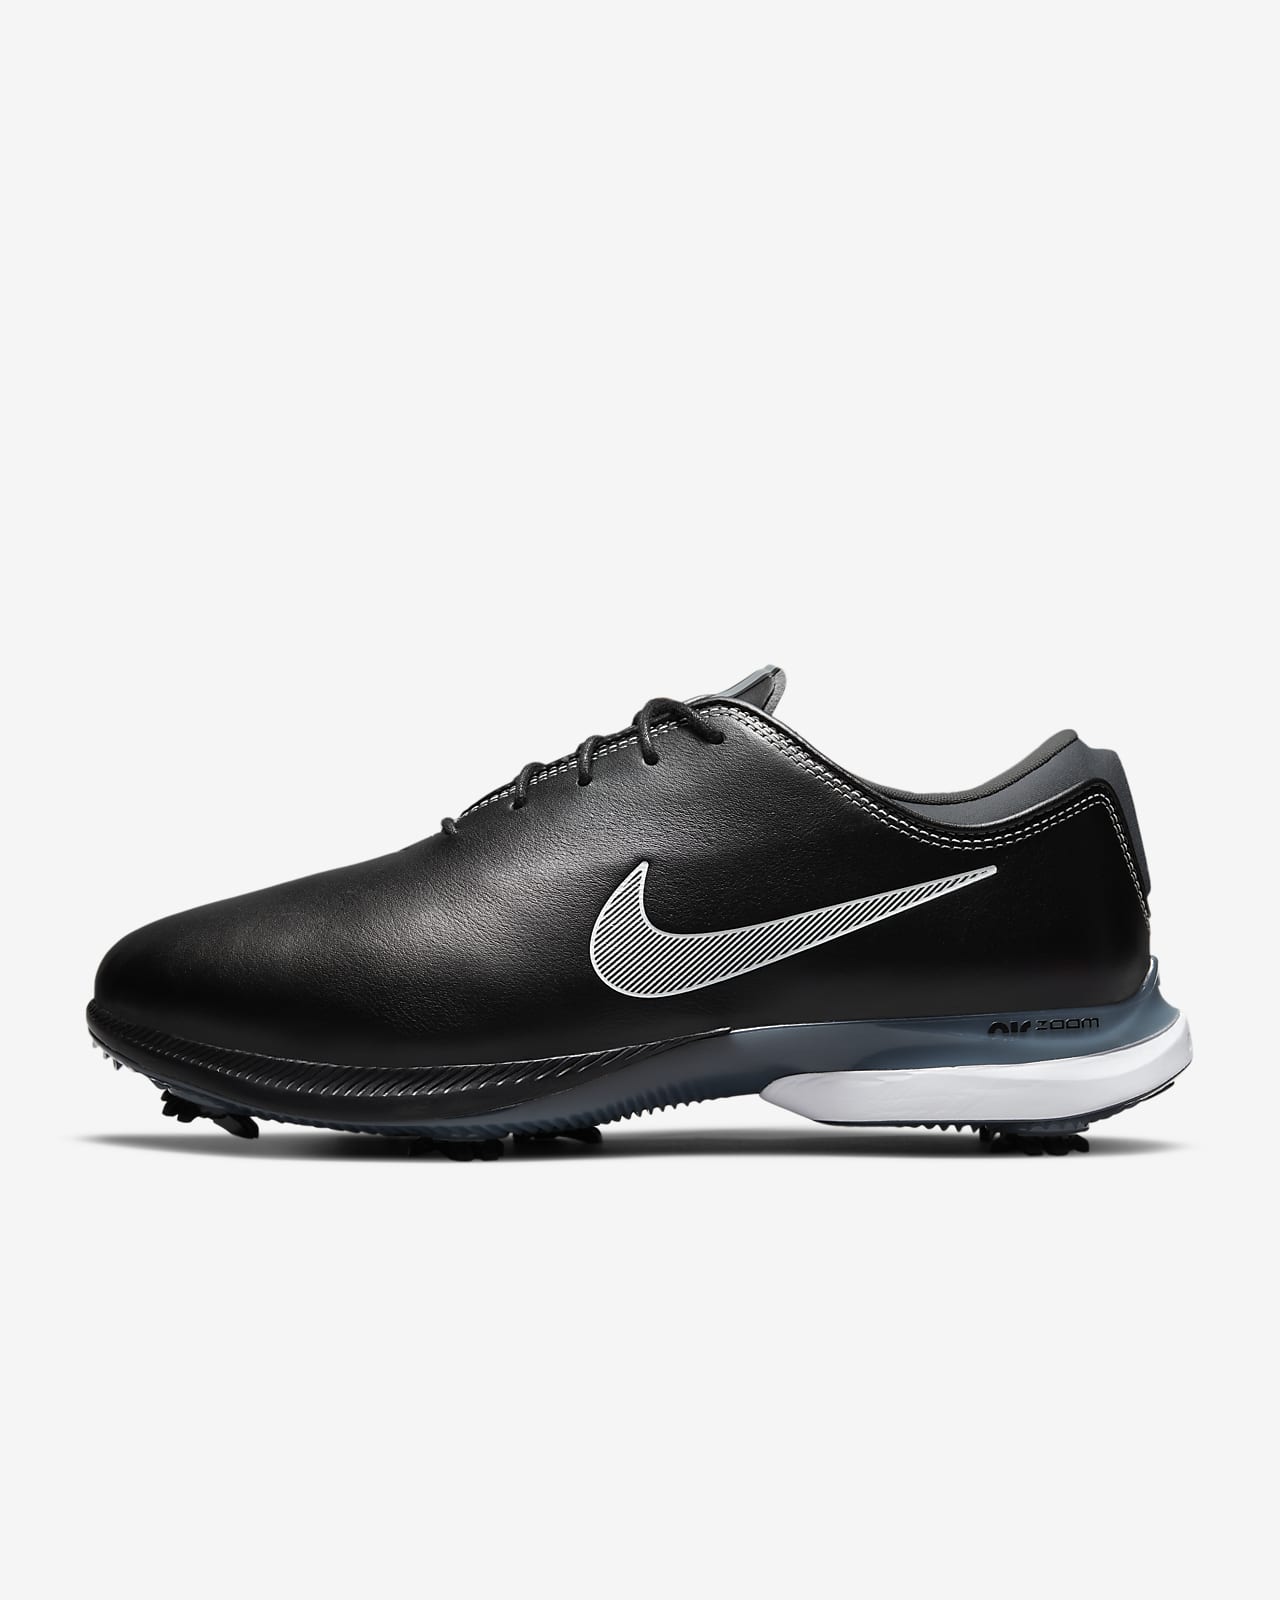 nike tour victory golf shoes